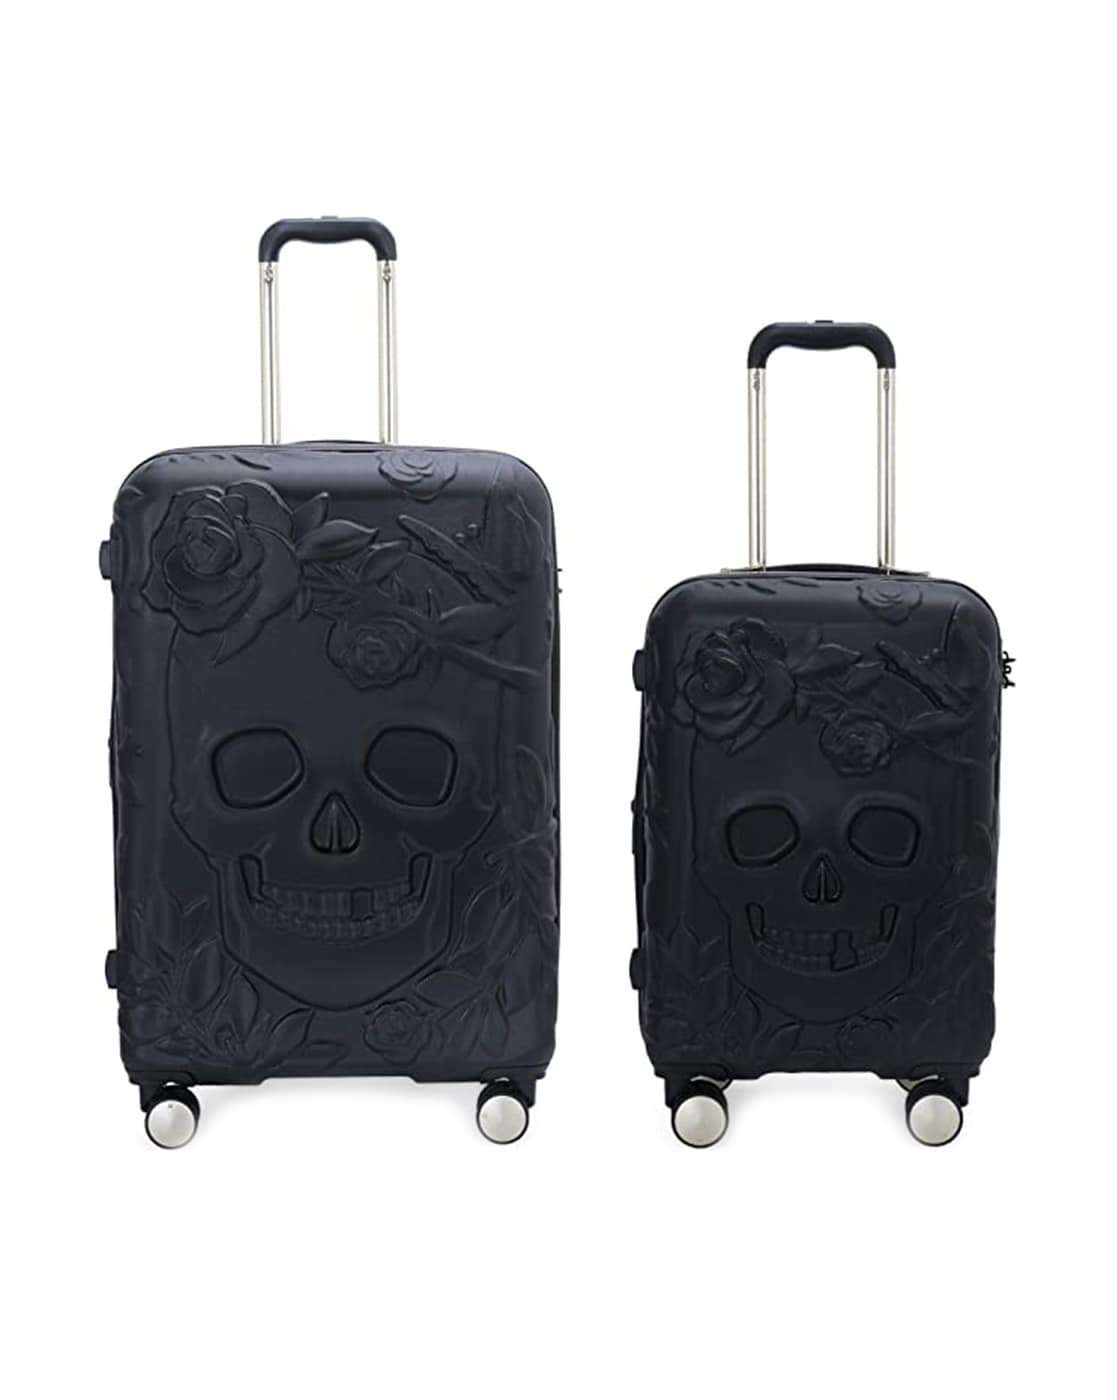 CITY BAG Medium Cabin Luggage bag(61cm)Travel bag Trolley Two Wheel And  Number Lock Expandable Check-in Suitcase - 24 inch blue - Price in India |  Flipkart.com